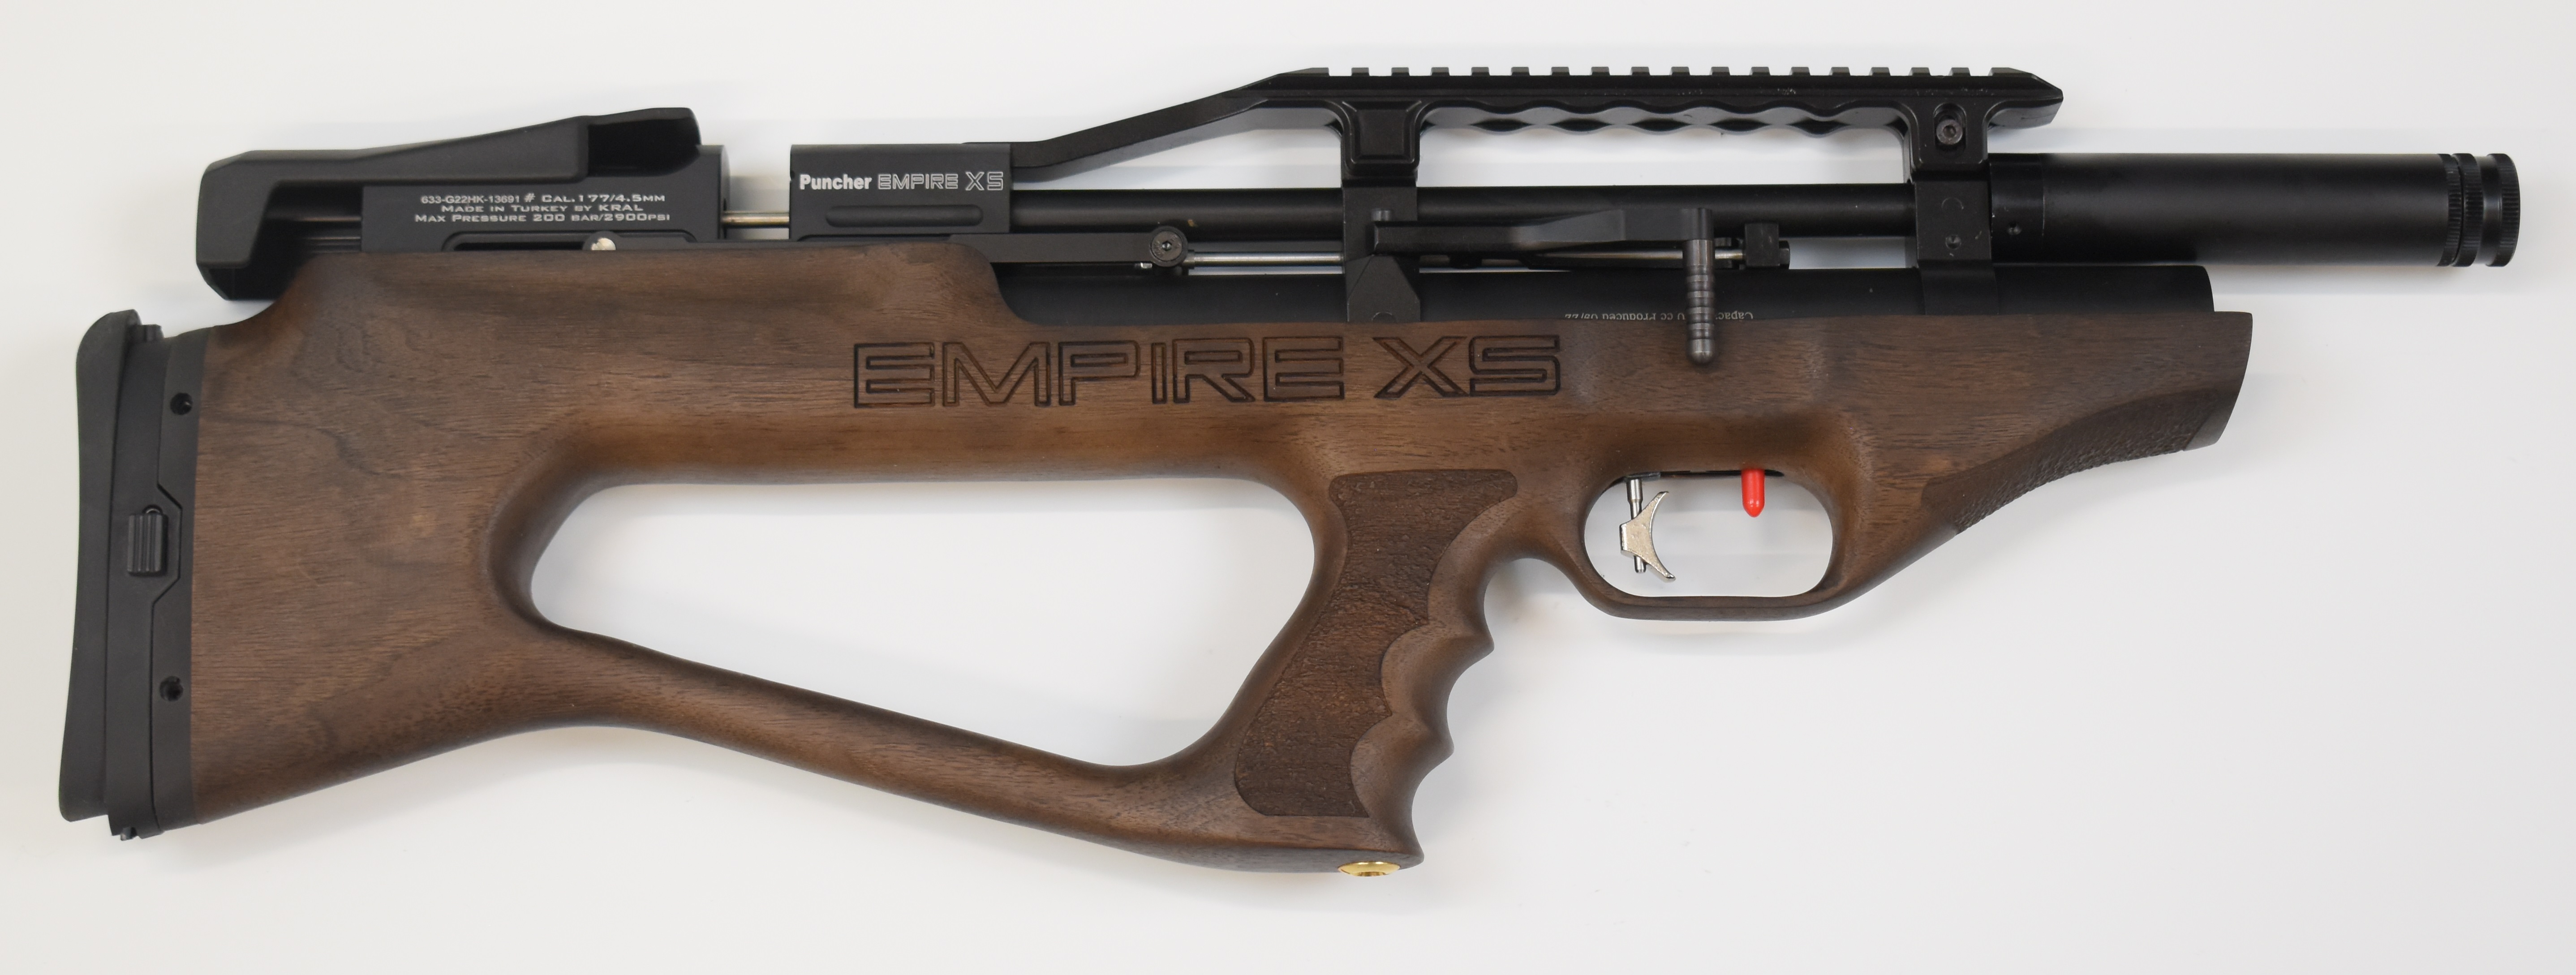 Kral Puncher Empire XS .177 PCP carbine air rifle with textured pistol grip, two 14-shot magazines - Image 2 of 9